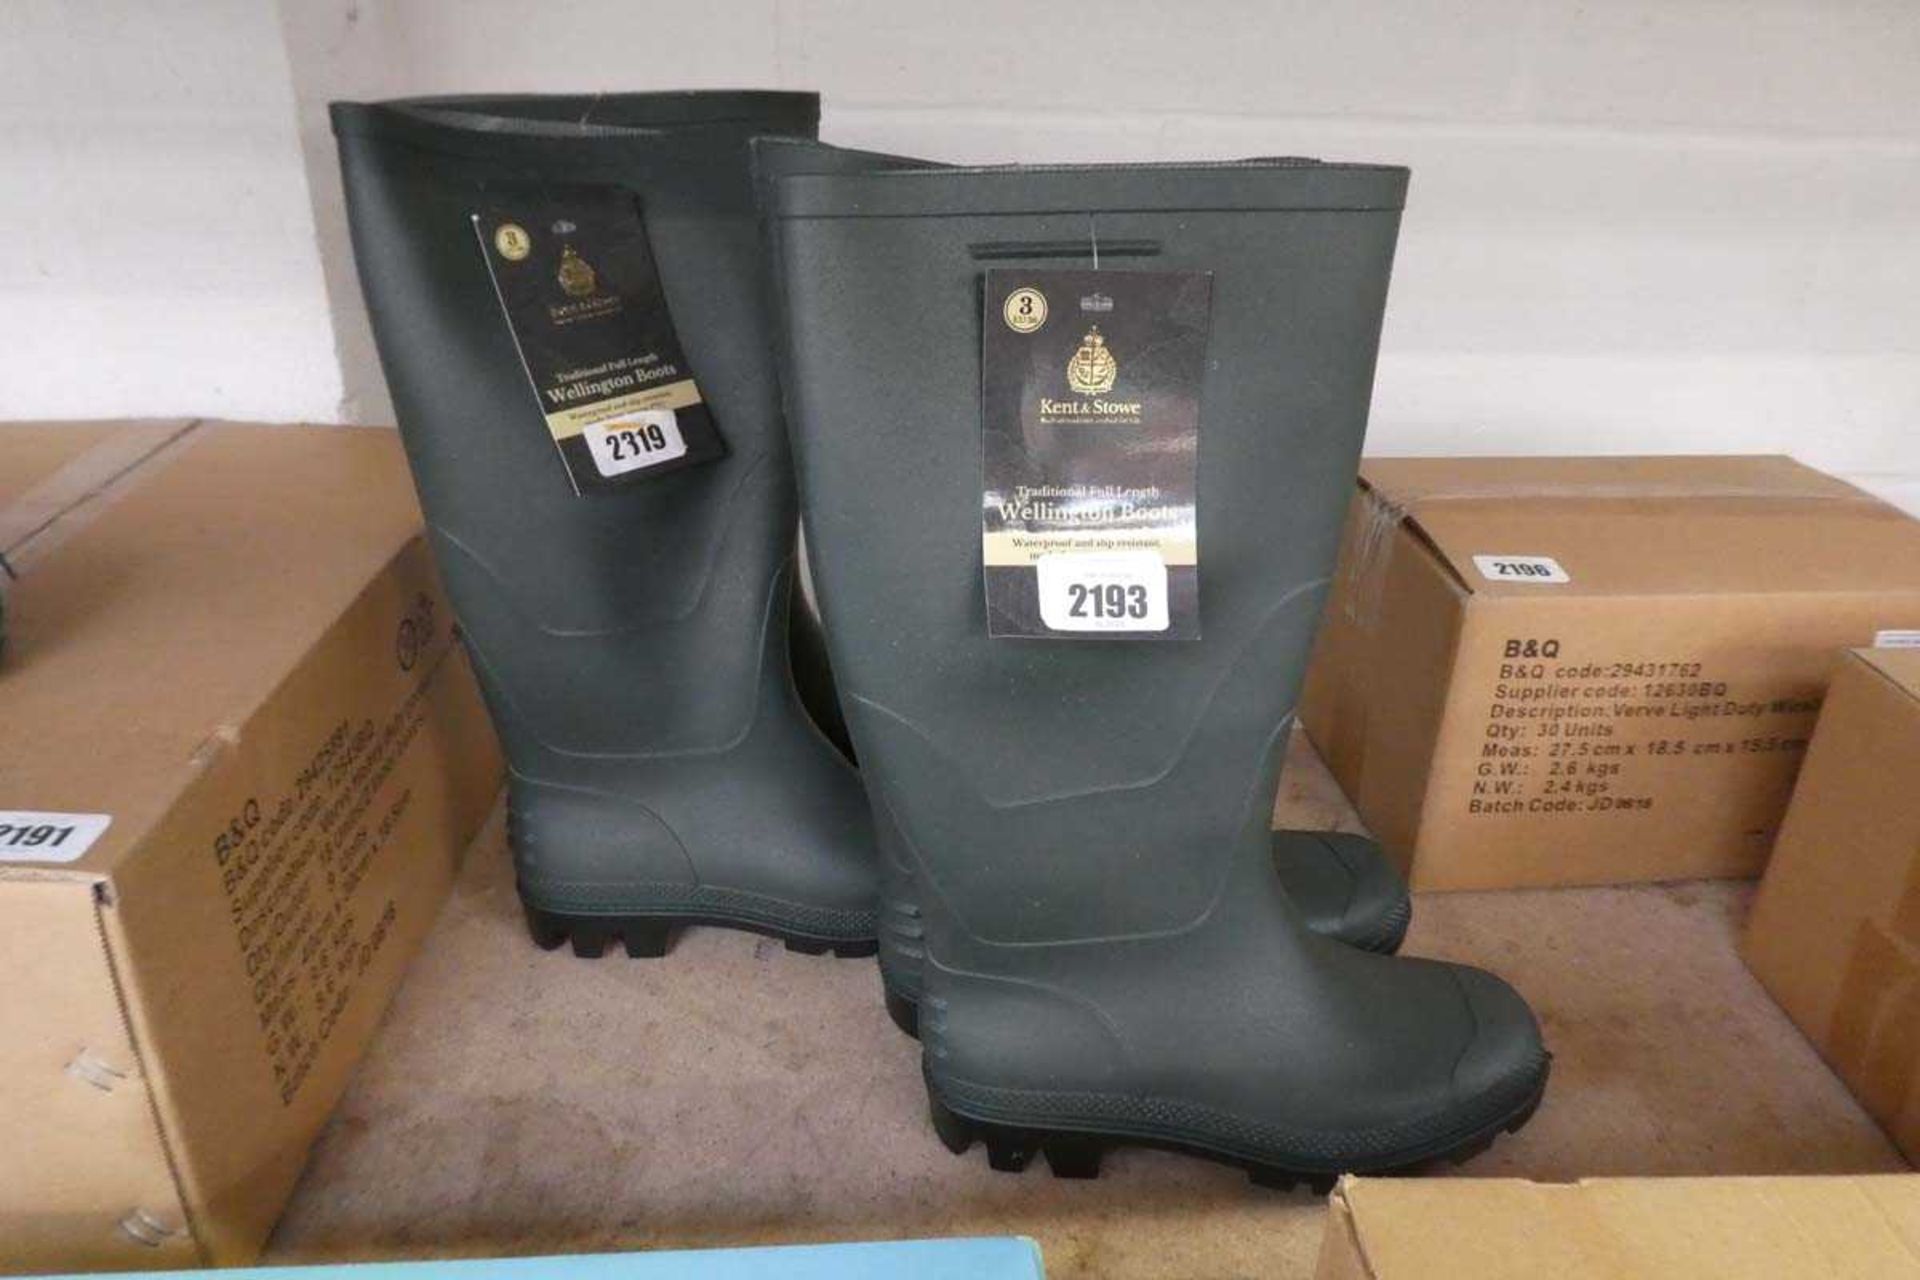 2 pairs of Kent & Stowe traditional full length Wellington boots (size 3)